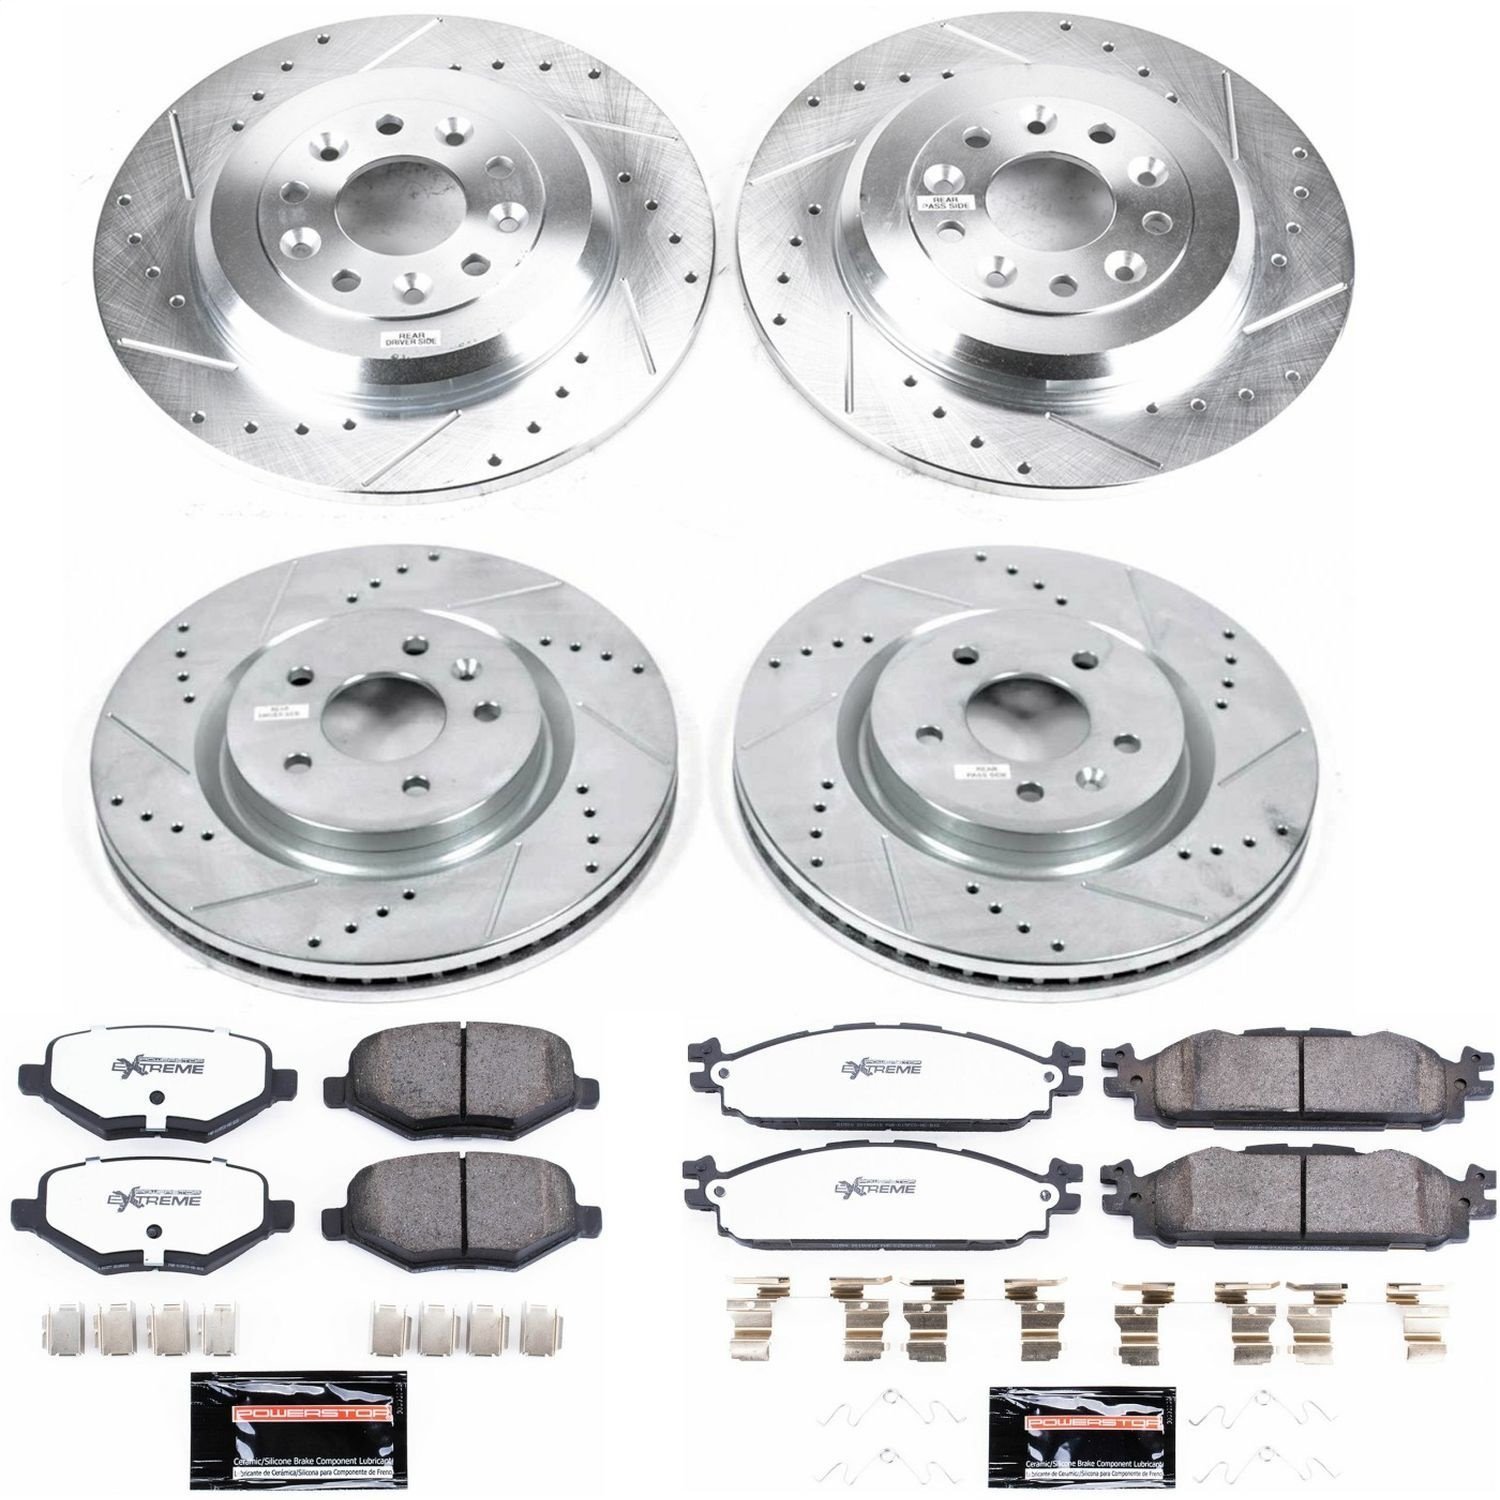 Z36 Truck and Tow Brake Pad and Rotor